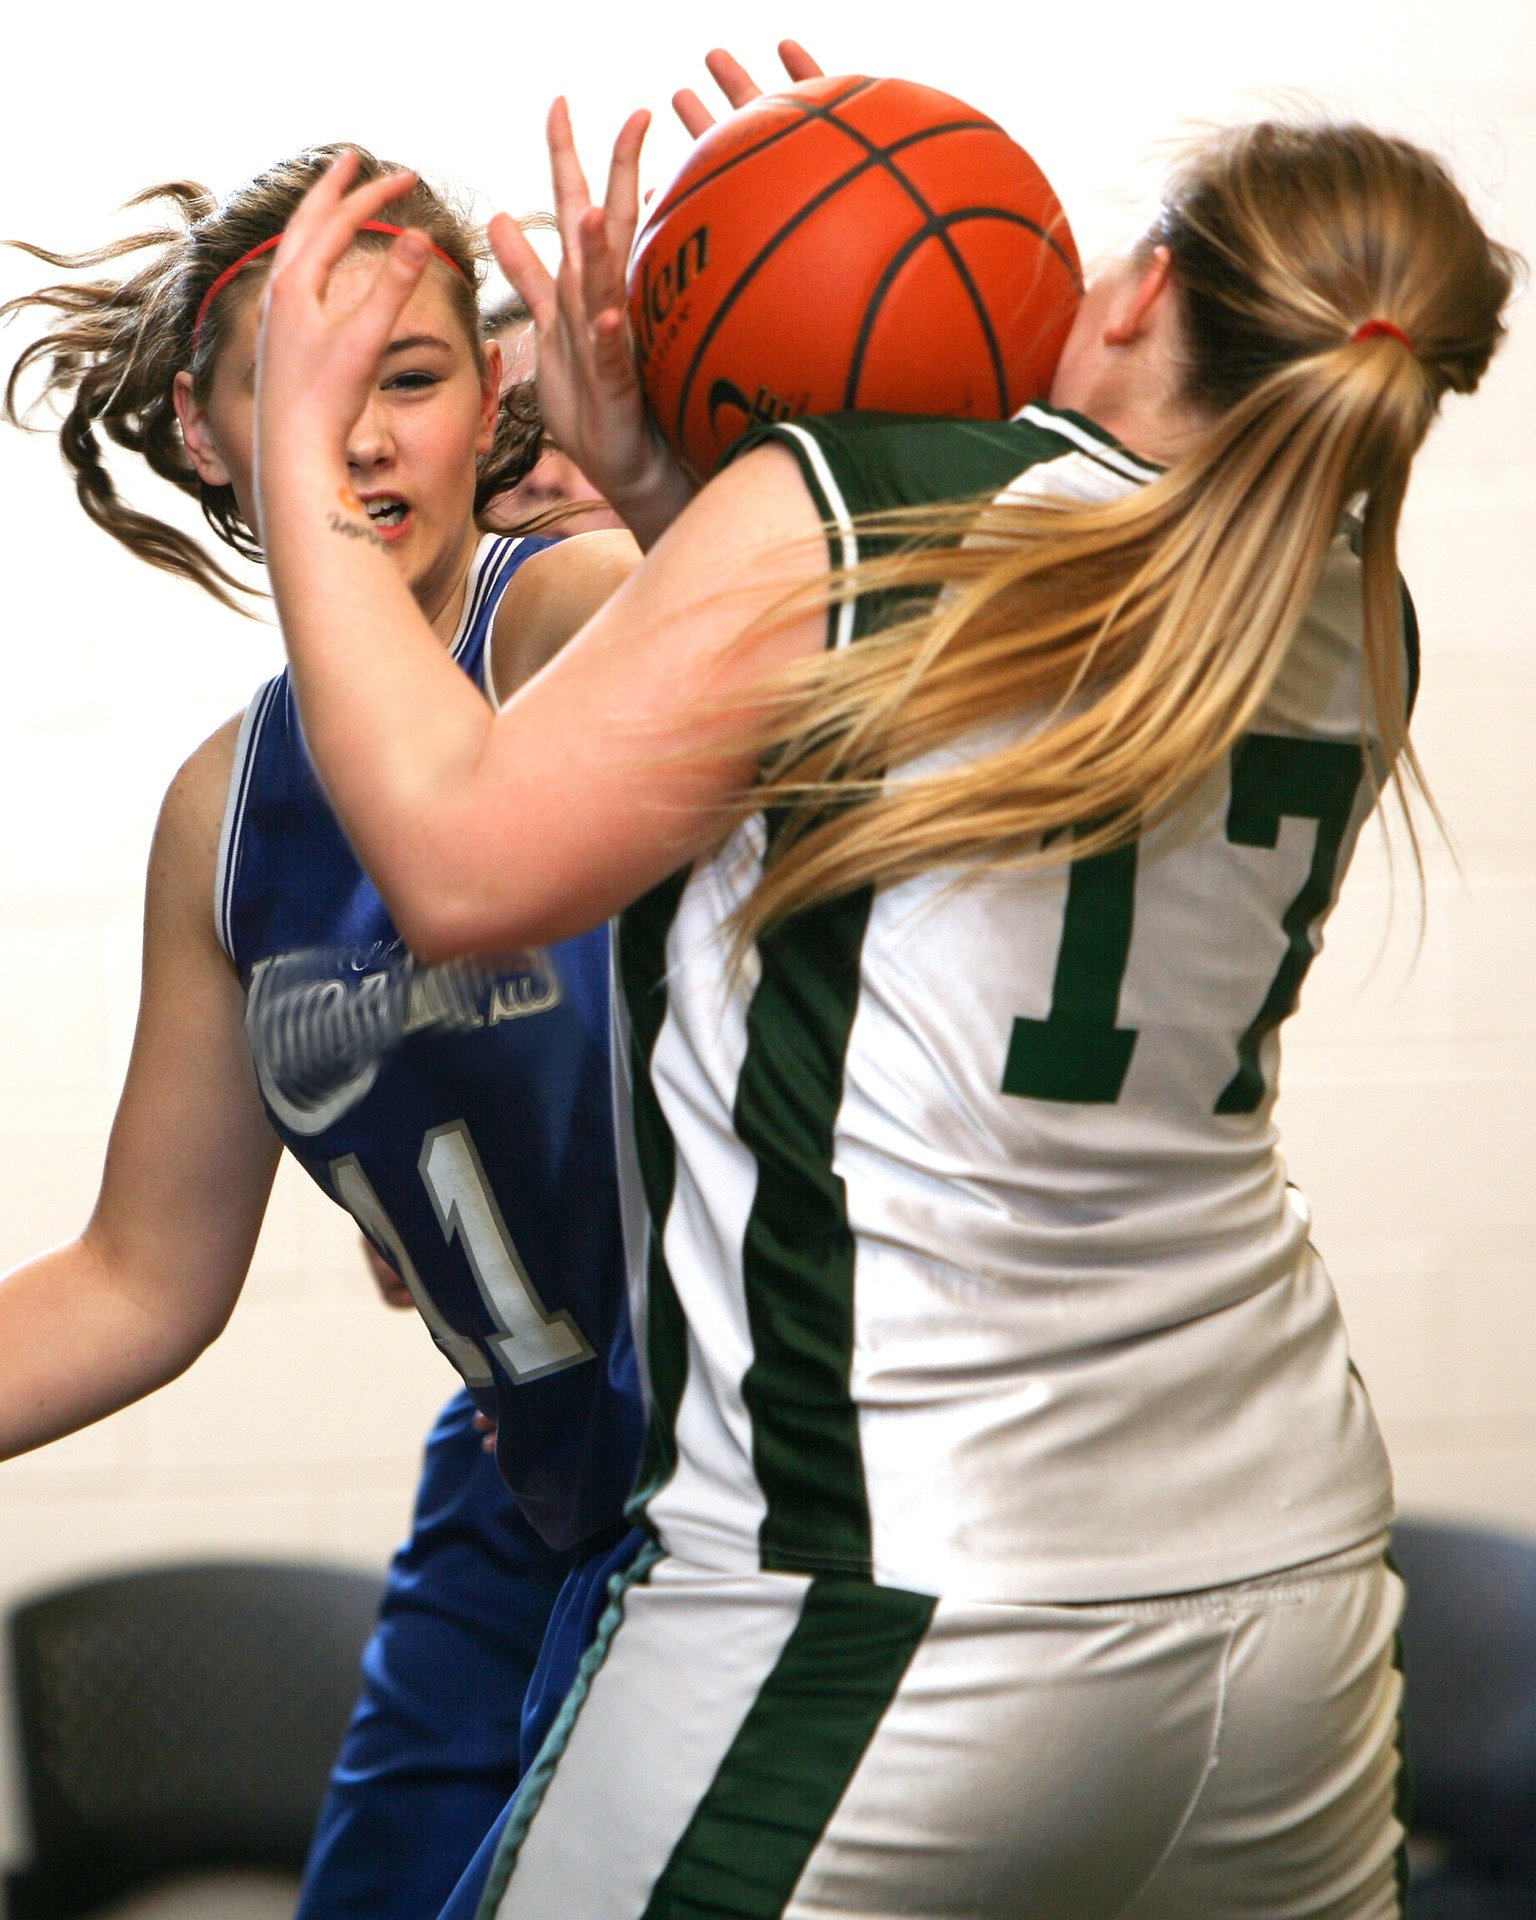 Girls basketball action on the court